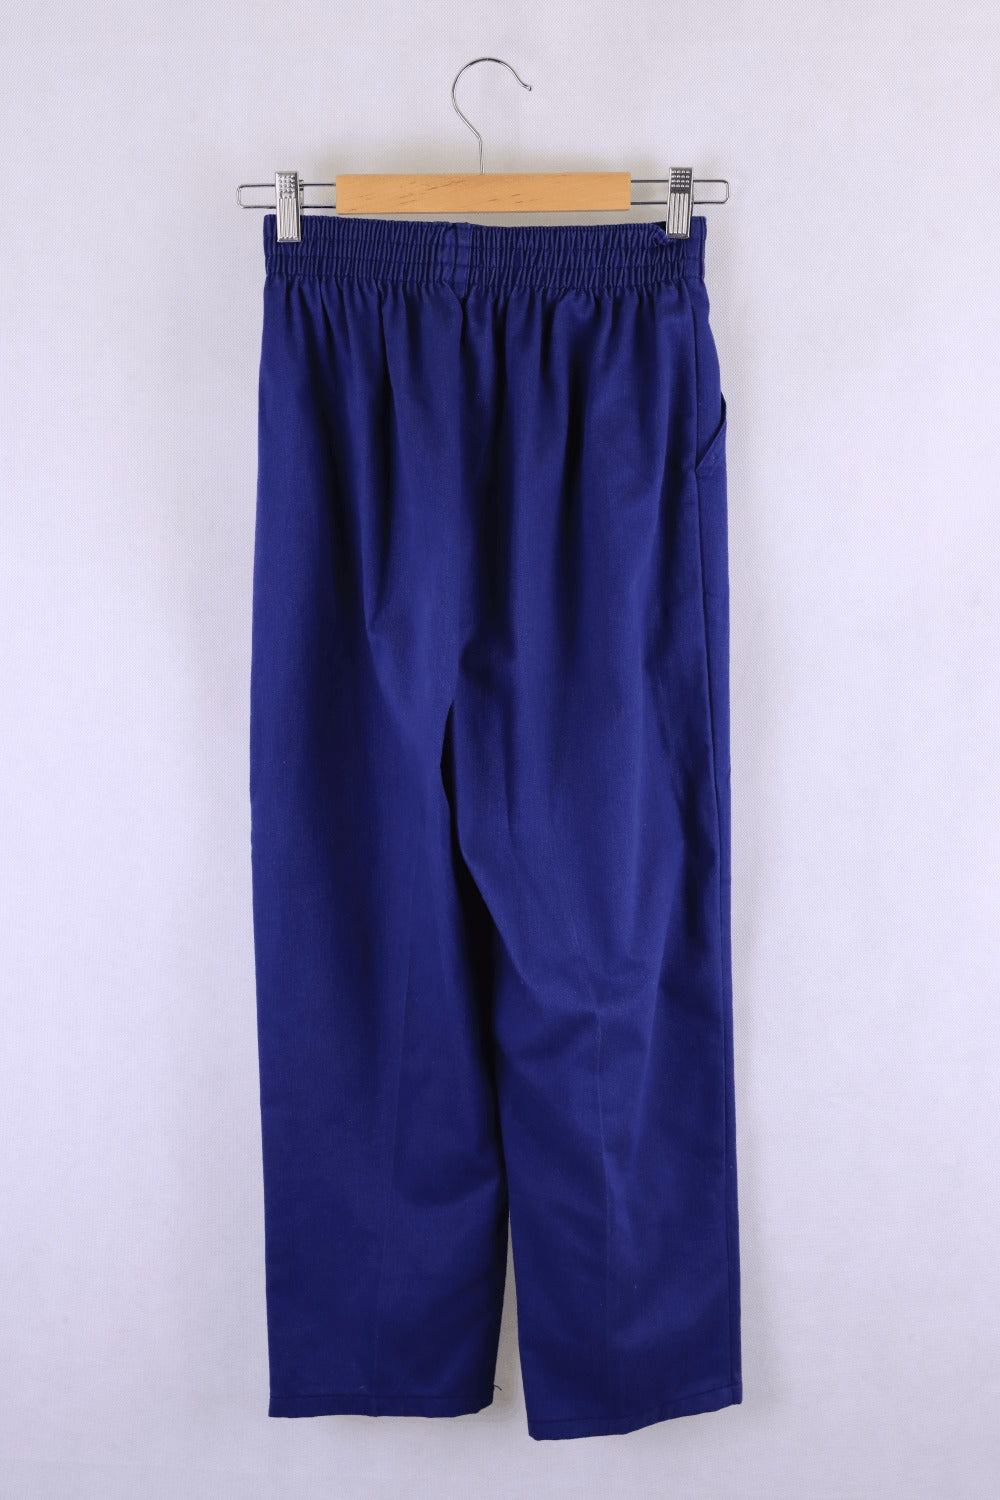 Separate Issue Blue Pants S